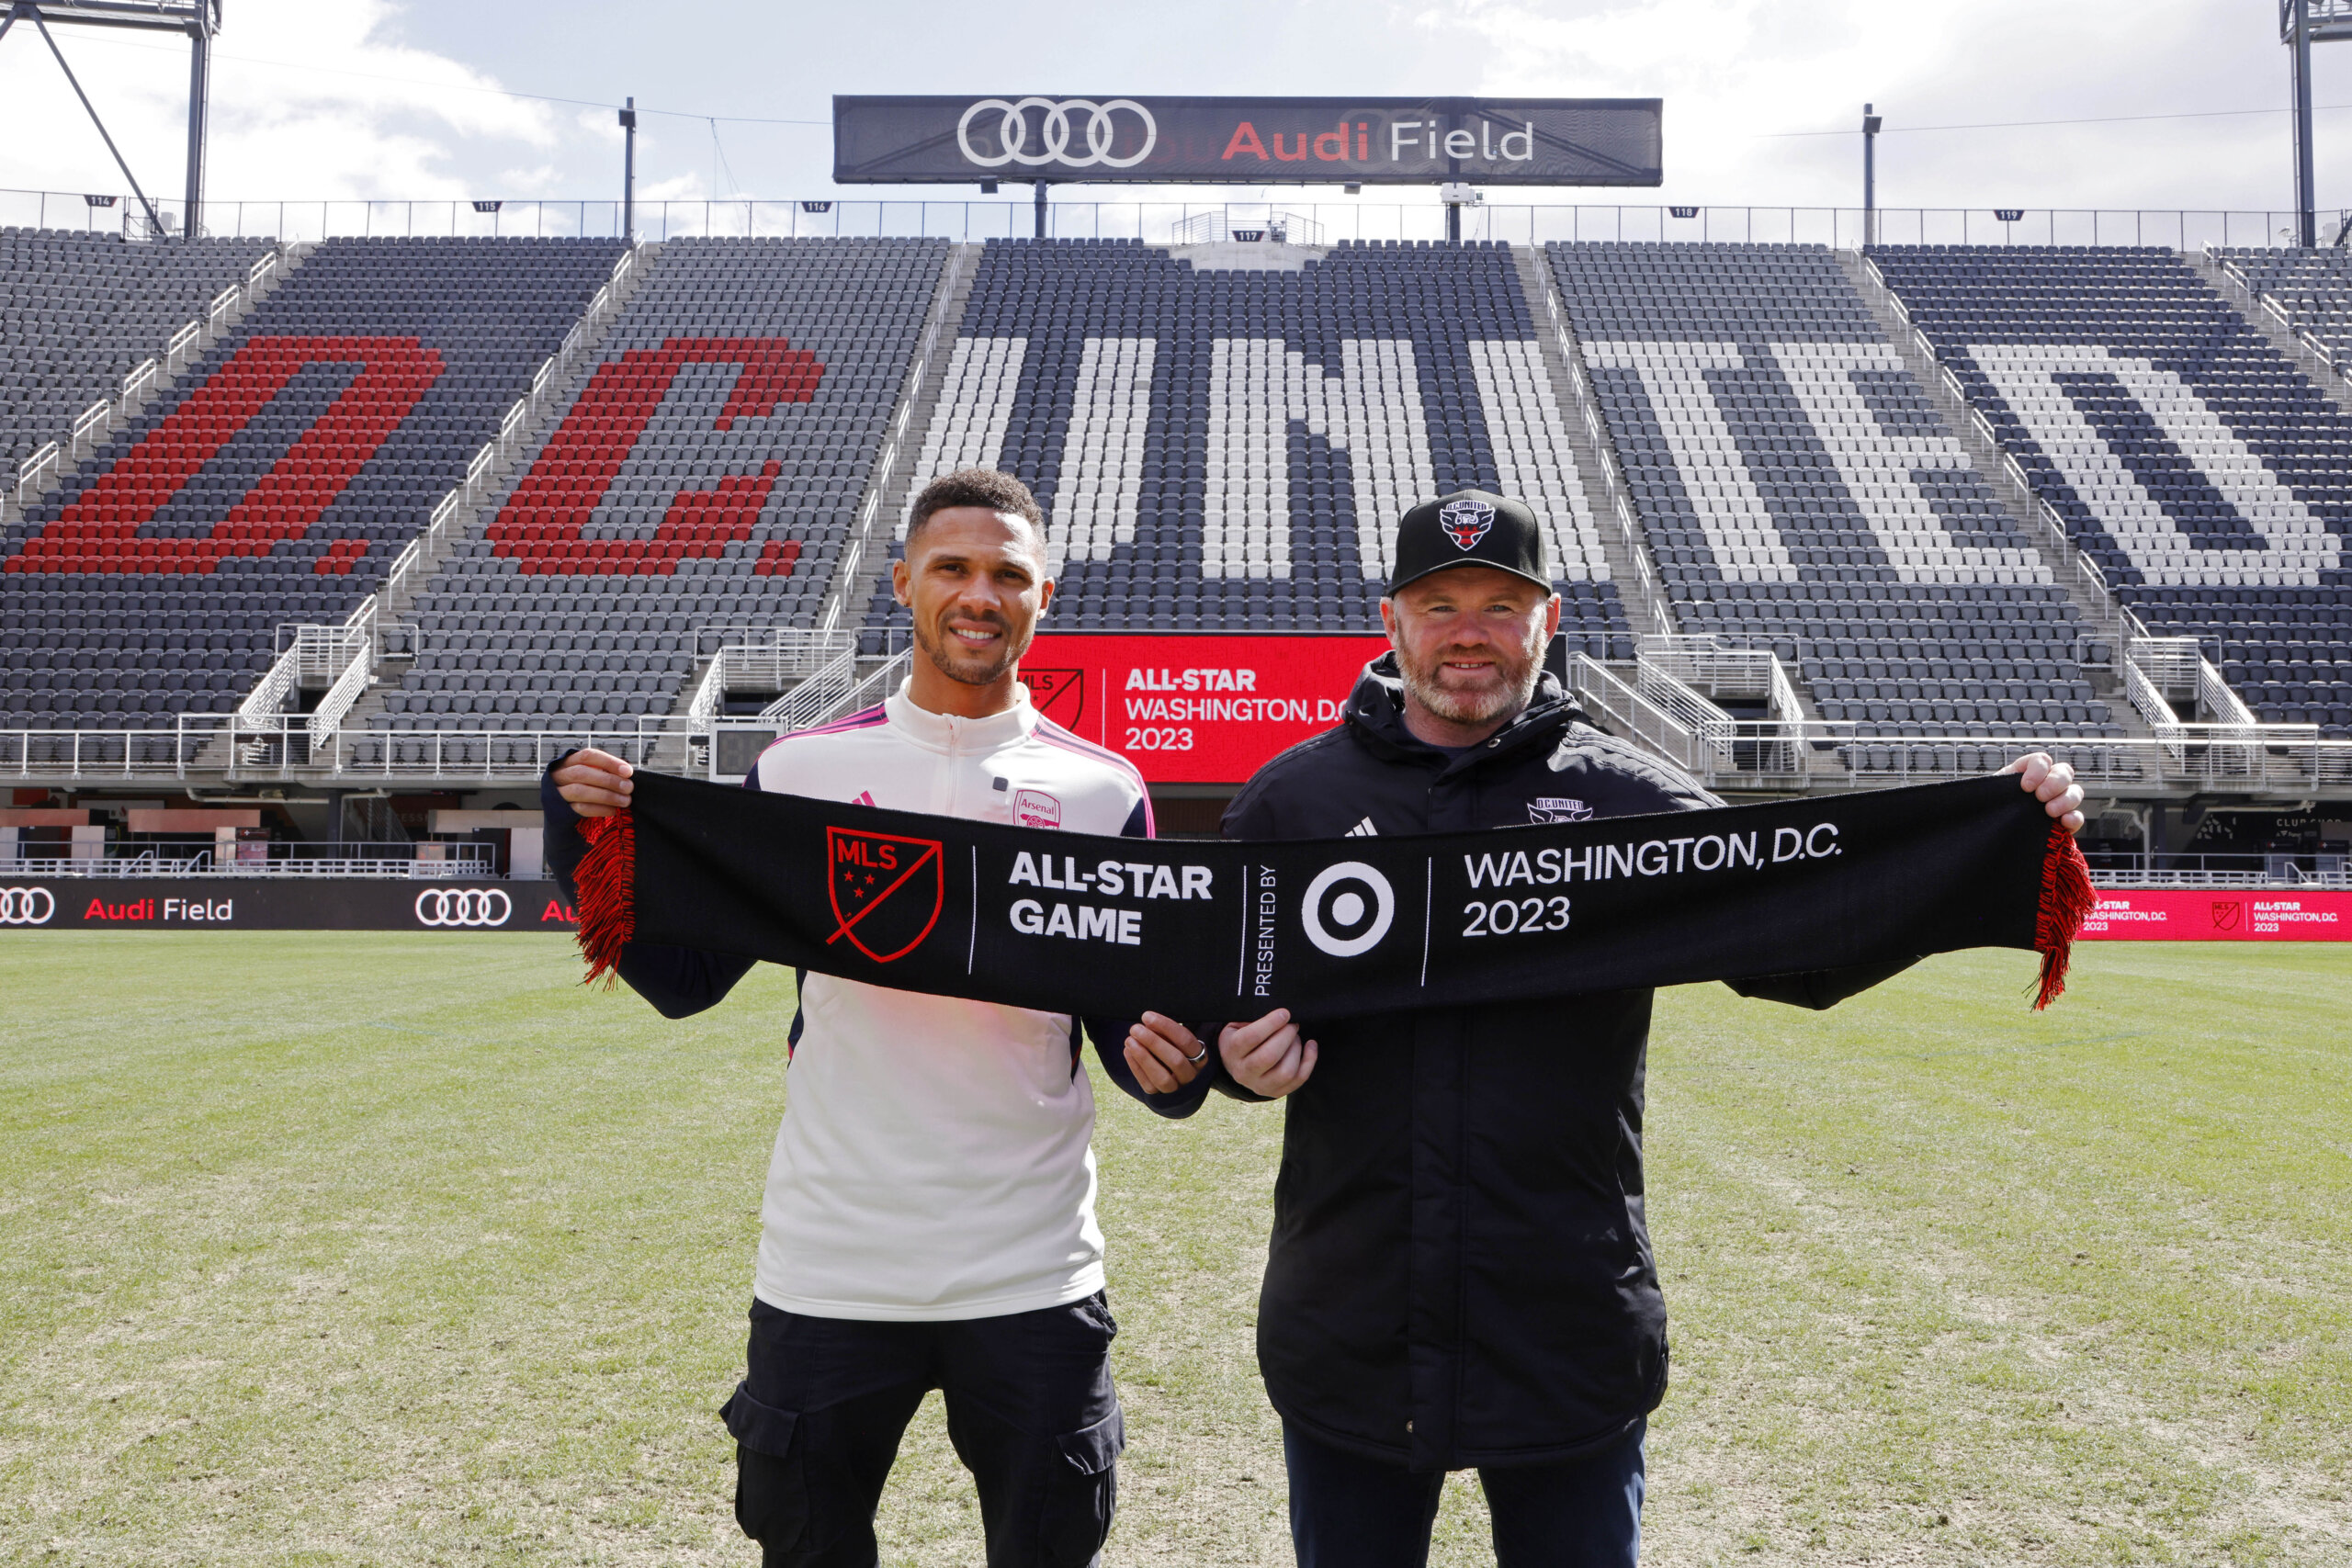 Tickets to MLS All-Star game at Audi Field sold out - WTOP News